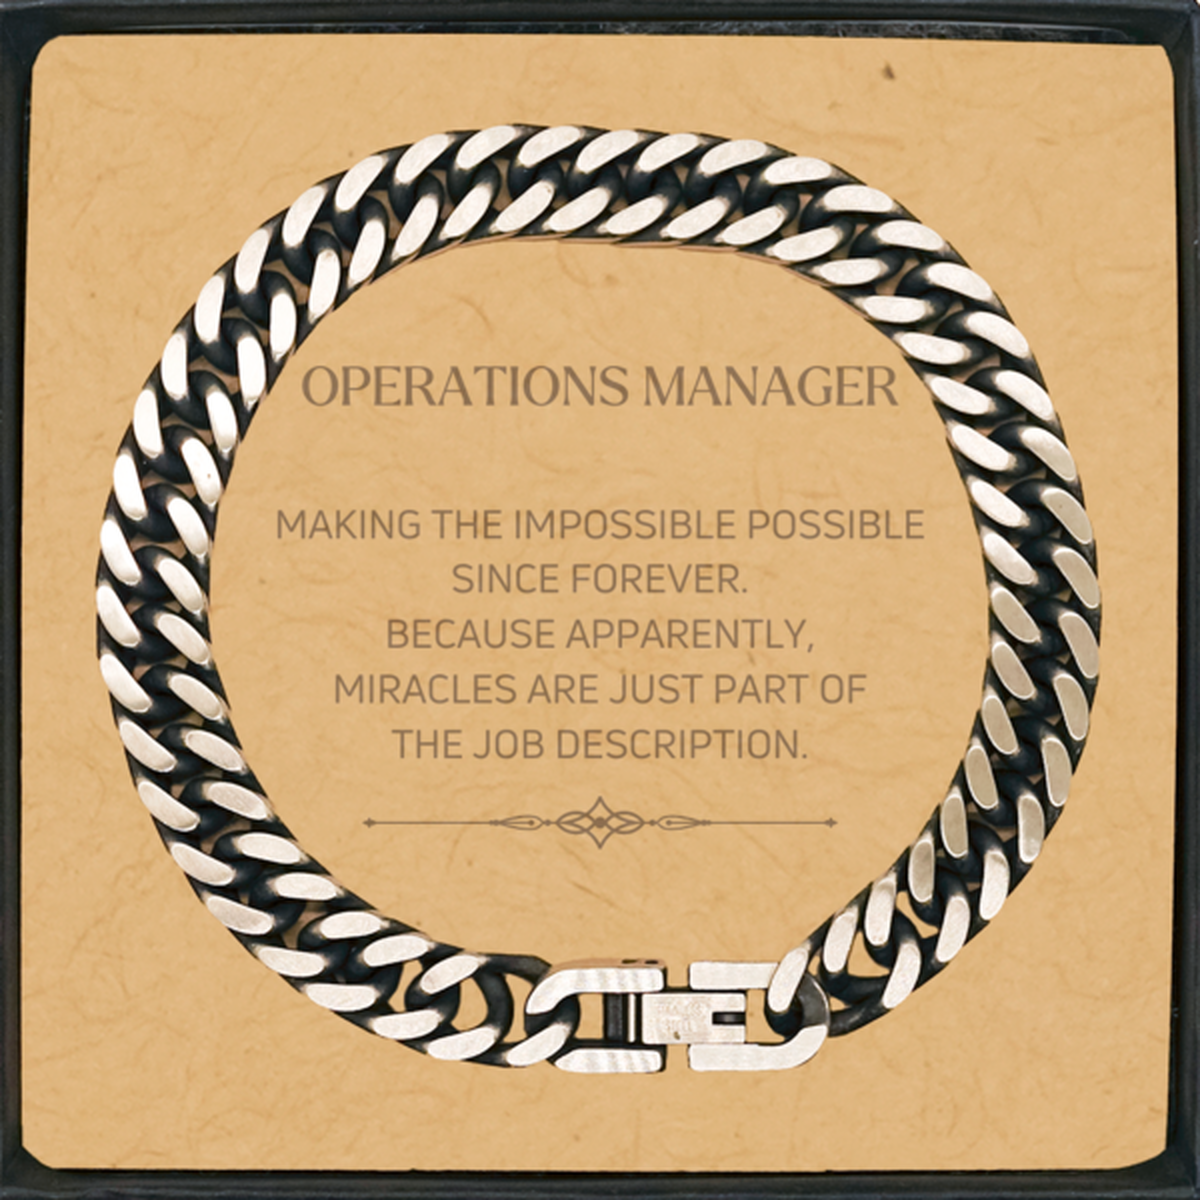 Funny Operations Manager Gifts, Miracles are just part of the job description, Inspirational Birthday Cuban Link Chain Bracelet For Operations Manager, Men, Women, Coworkers, Friends, Boss